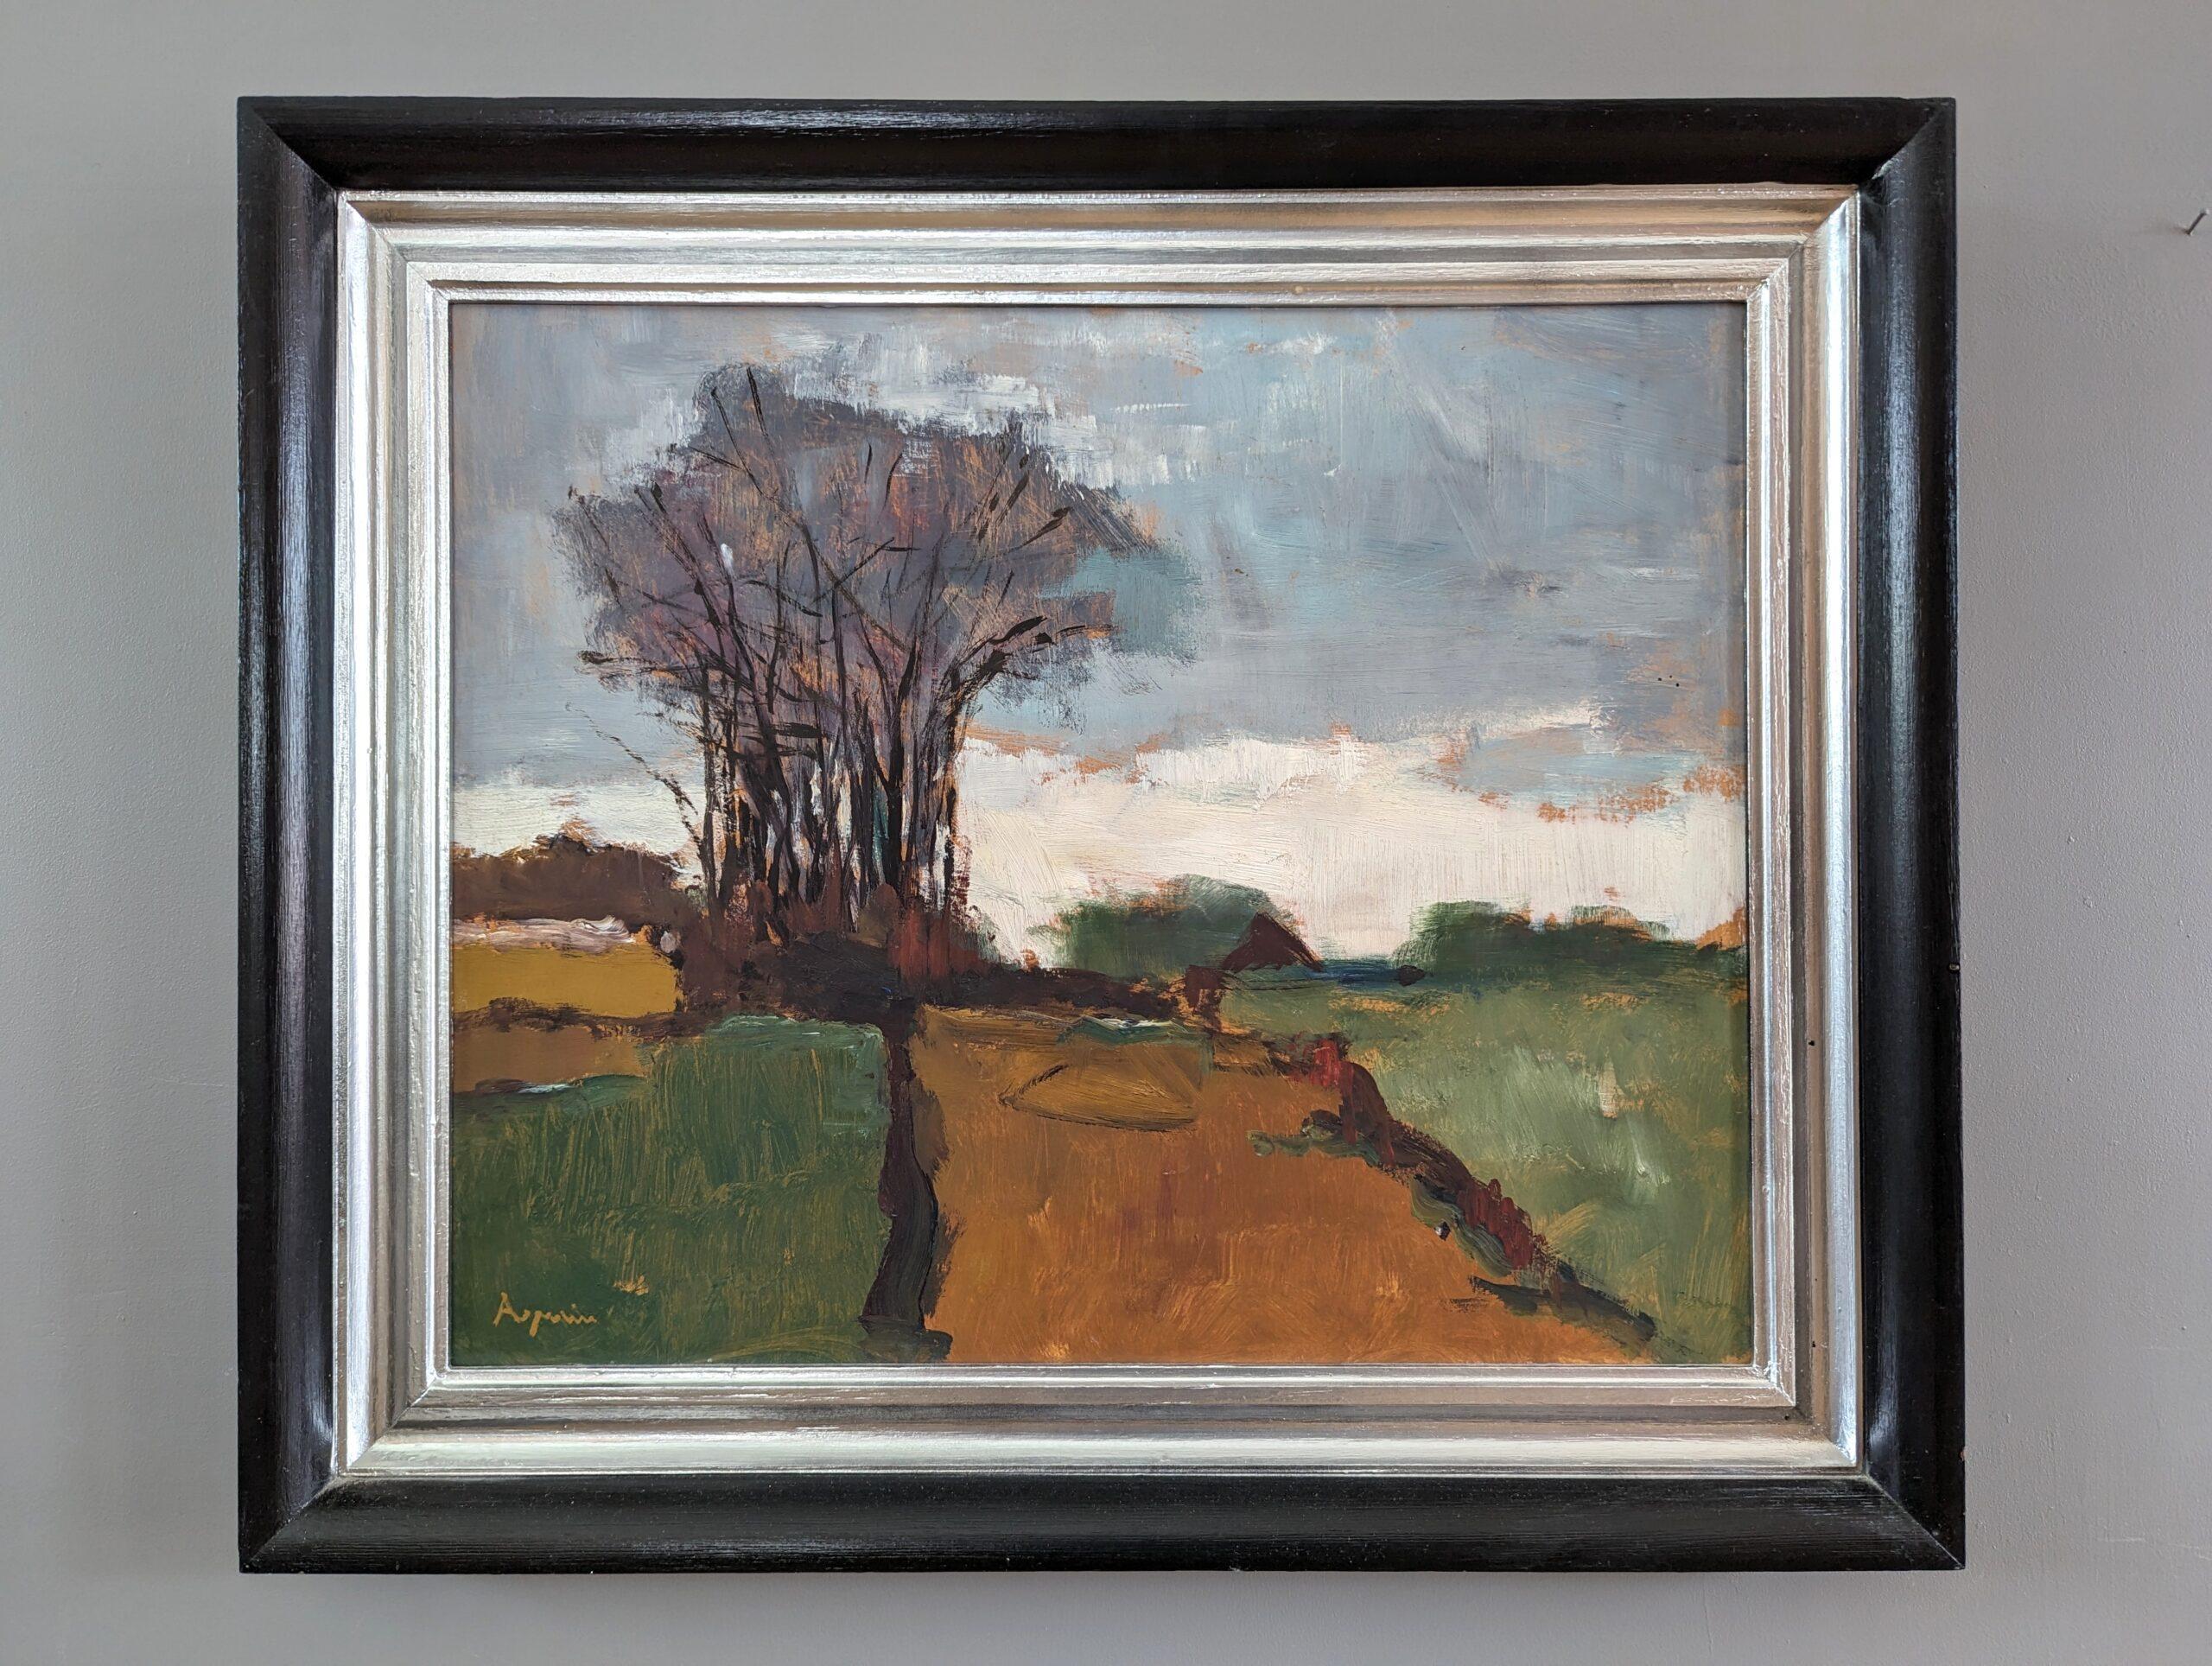 THE GROVE
Oil on Board
Size: 48 x 56 cm  18.9 x 22 inches (including frame)

A very well-executed mid-century modernist landscape composition, painted in oil onto board.

This atmospheric landscape scene depicts a wide terracotta-coloured path in